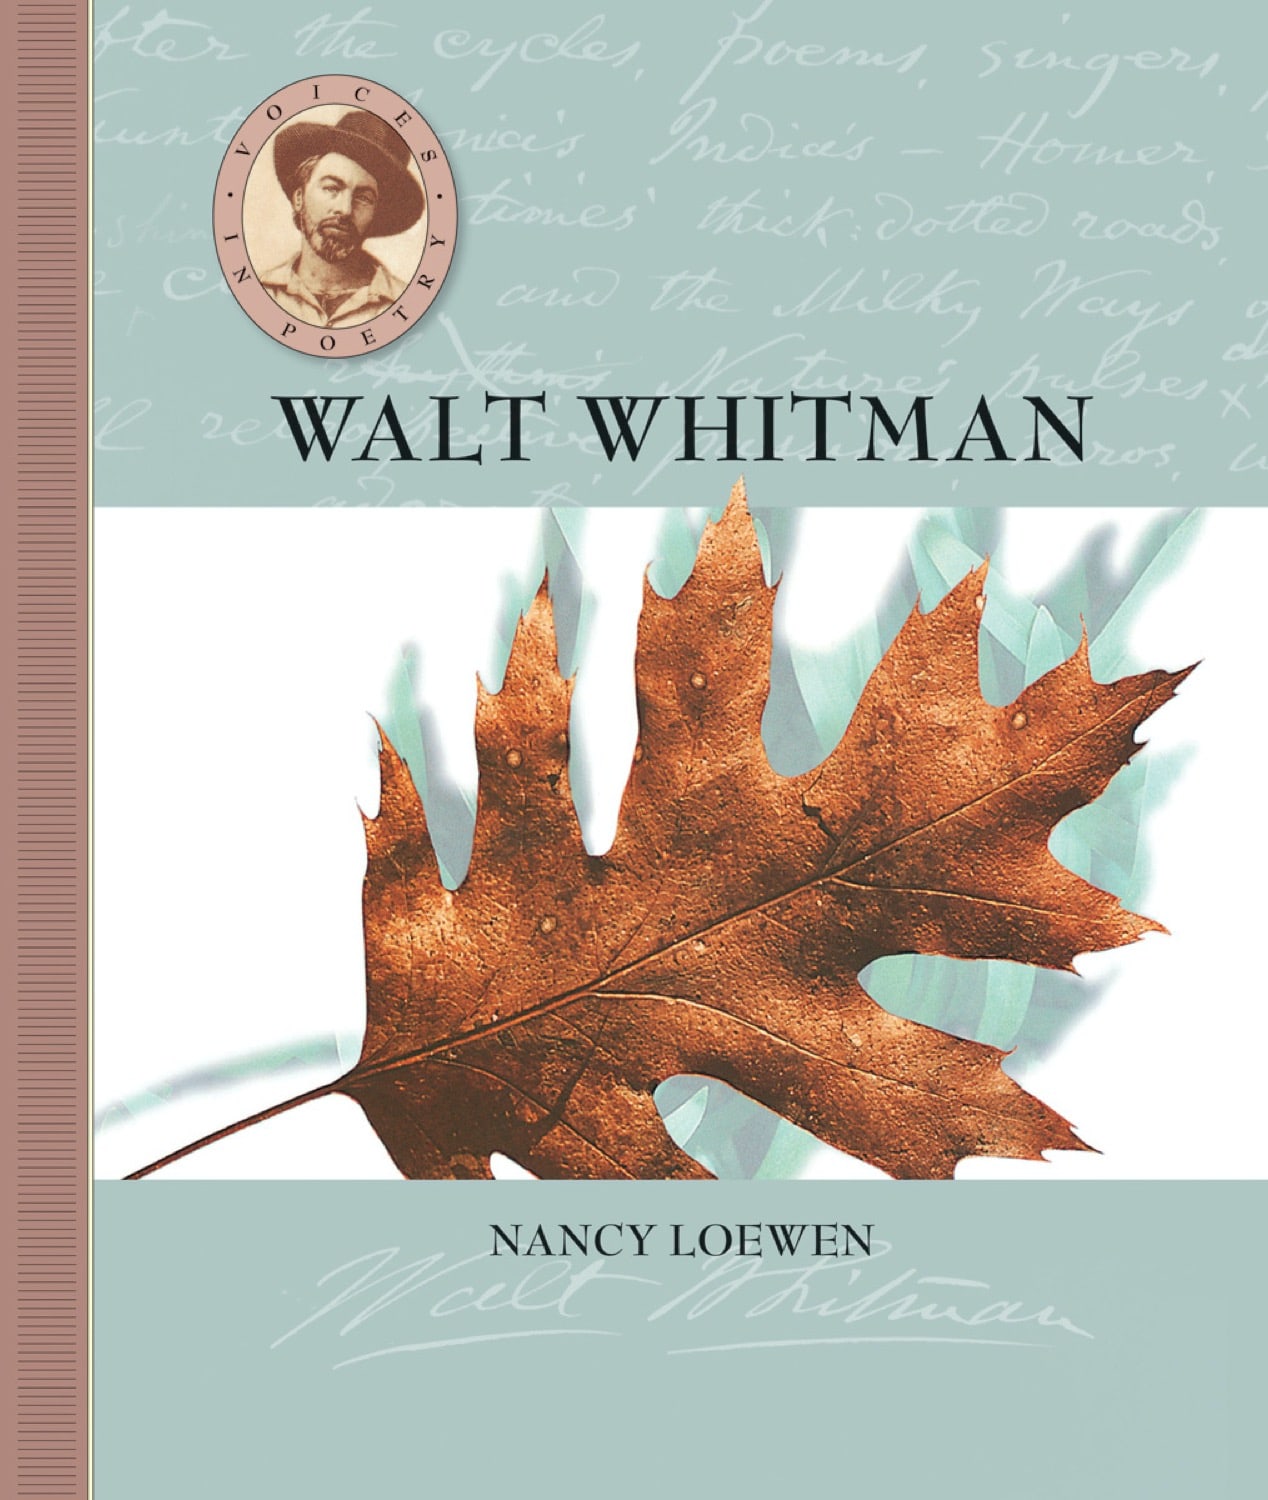 Voices in Poetry: Walt Whitman